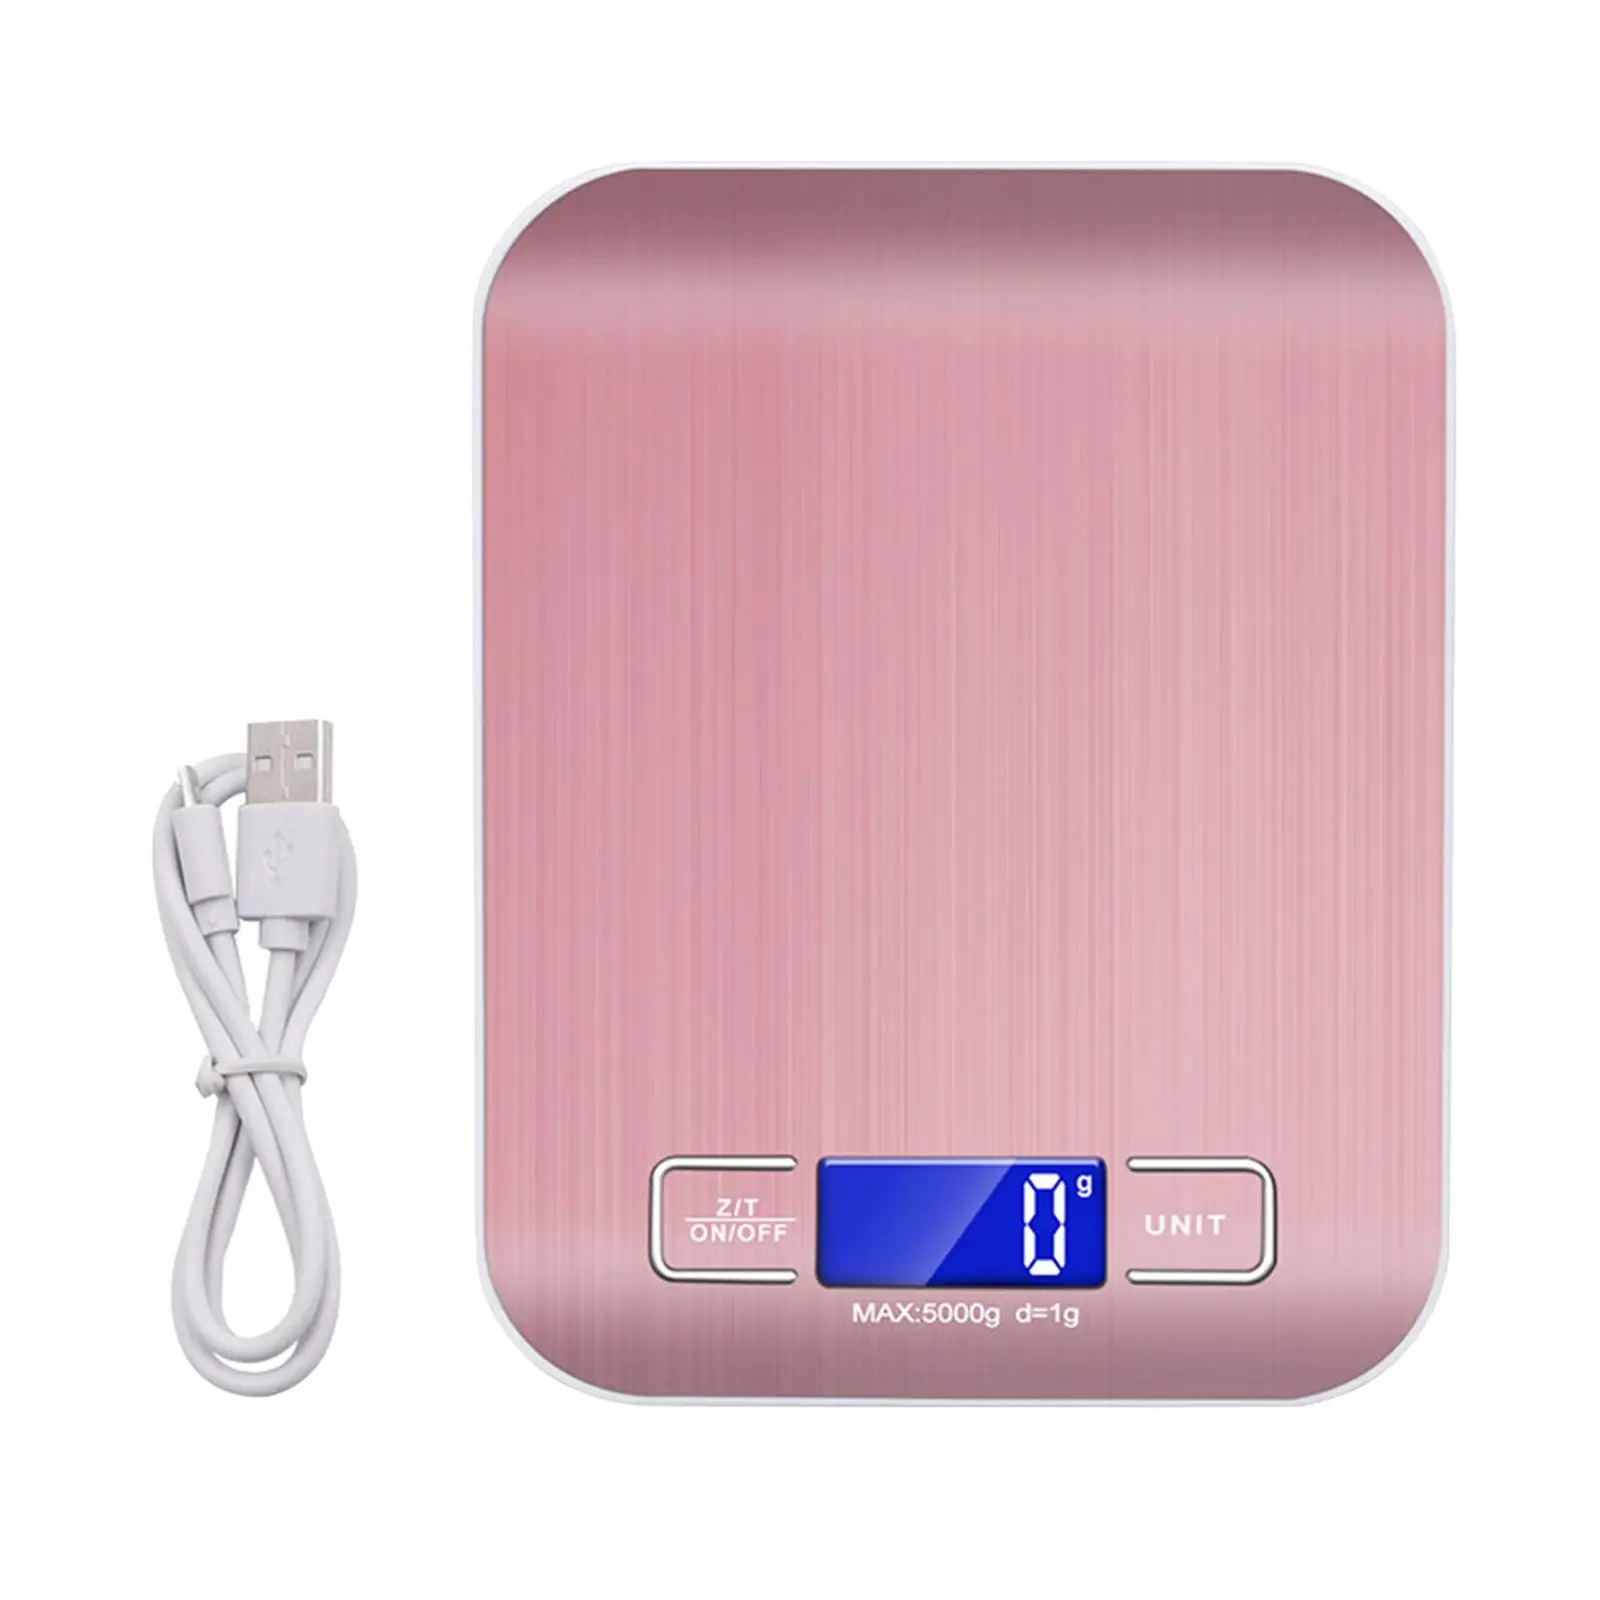 Portable Digital kitchen Scales 5kg 10kg/1g Stainless Steel LCD Electronic Food Diet Postal Balance Measure Tools weight Libra